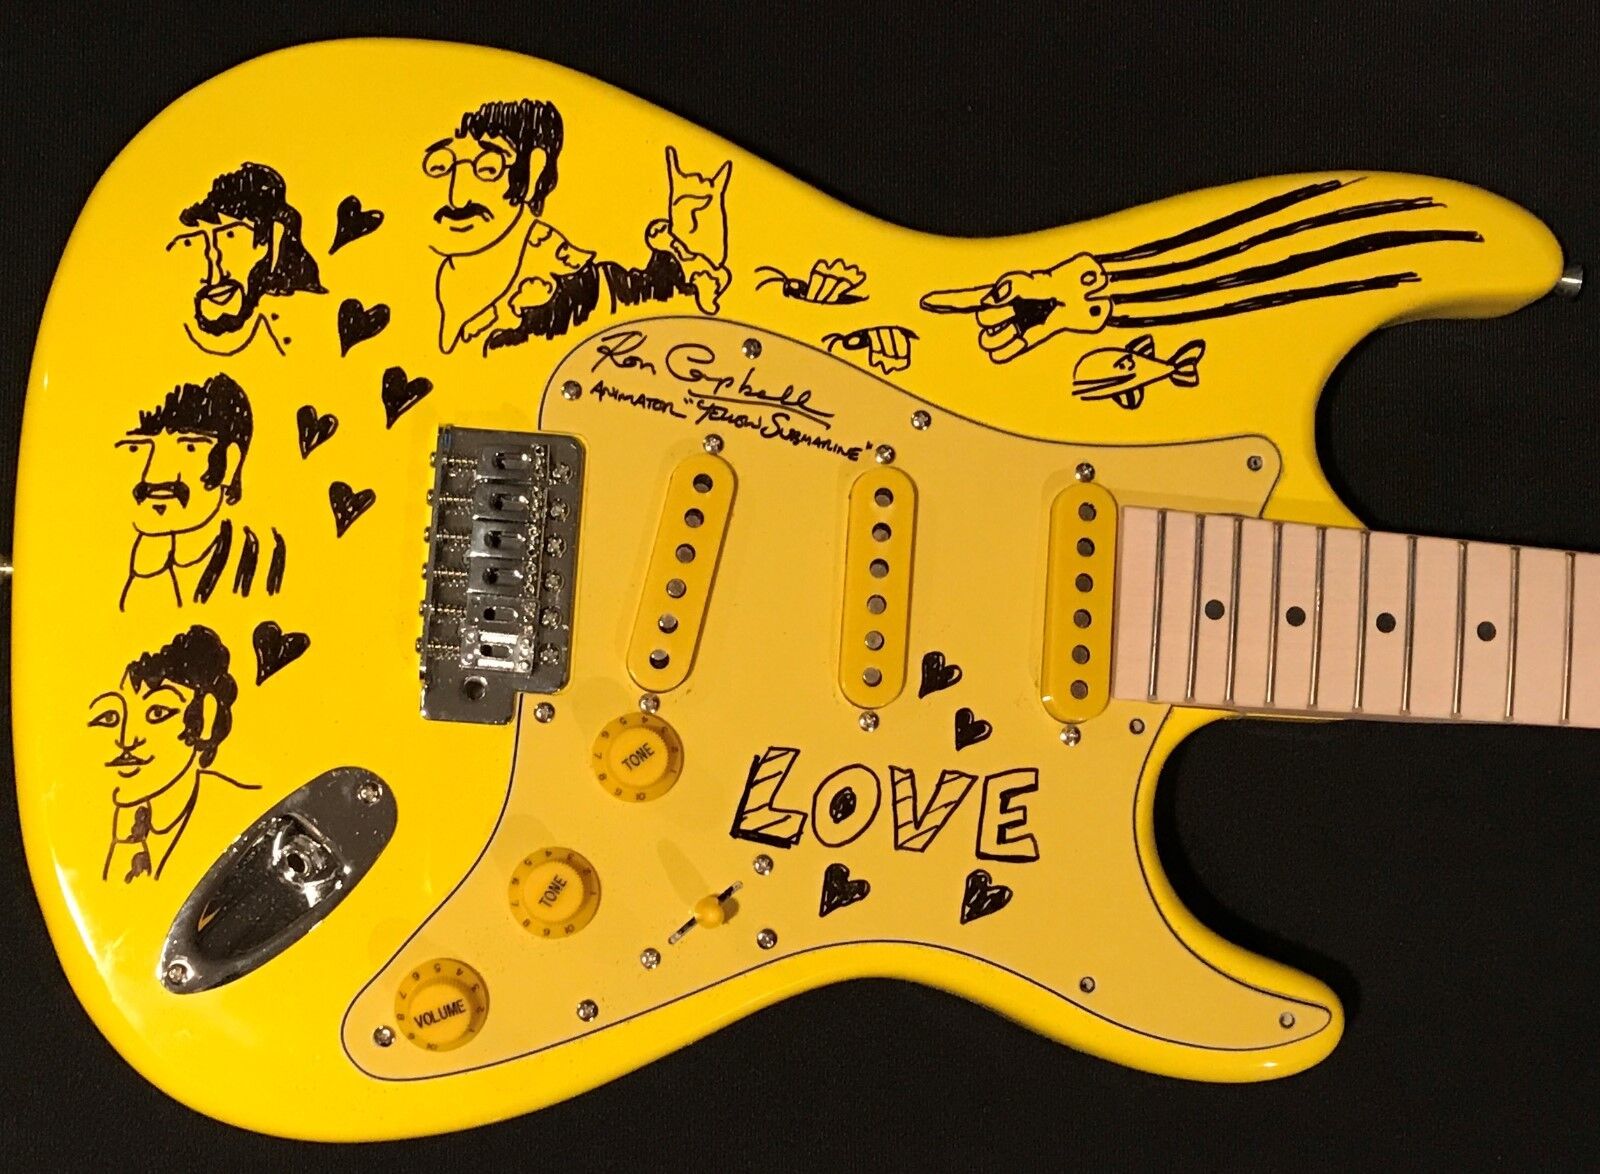 The Beatles Signed Guitar Yellow Submarine Ron Campbell Art Sketch McCartney +3